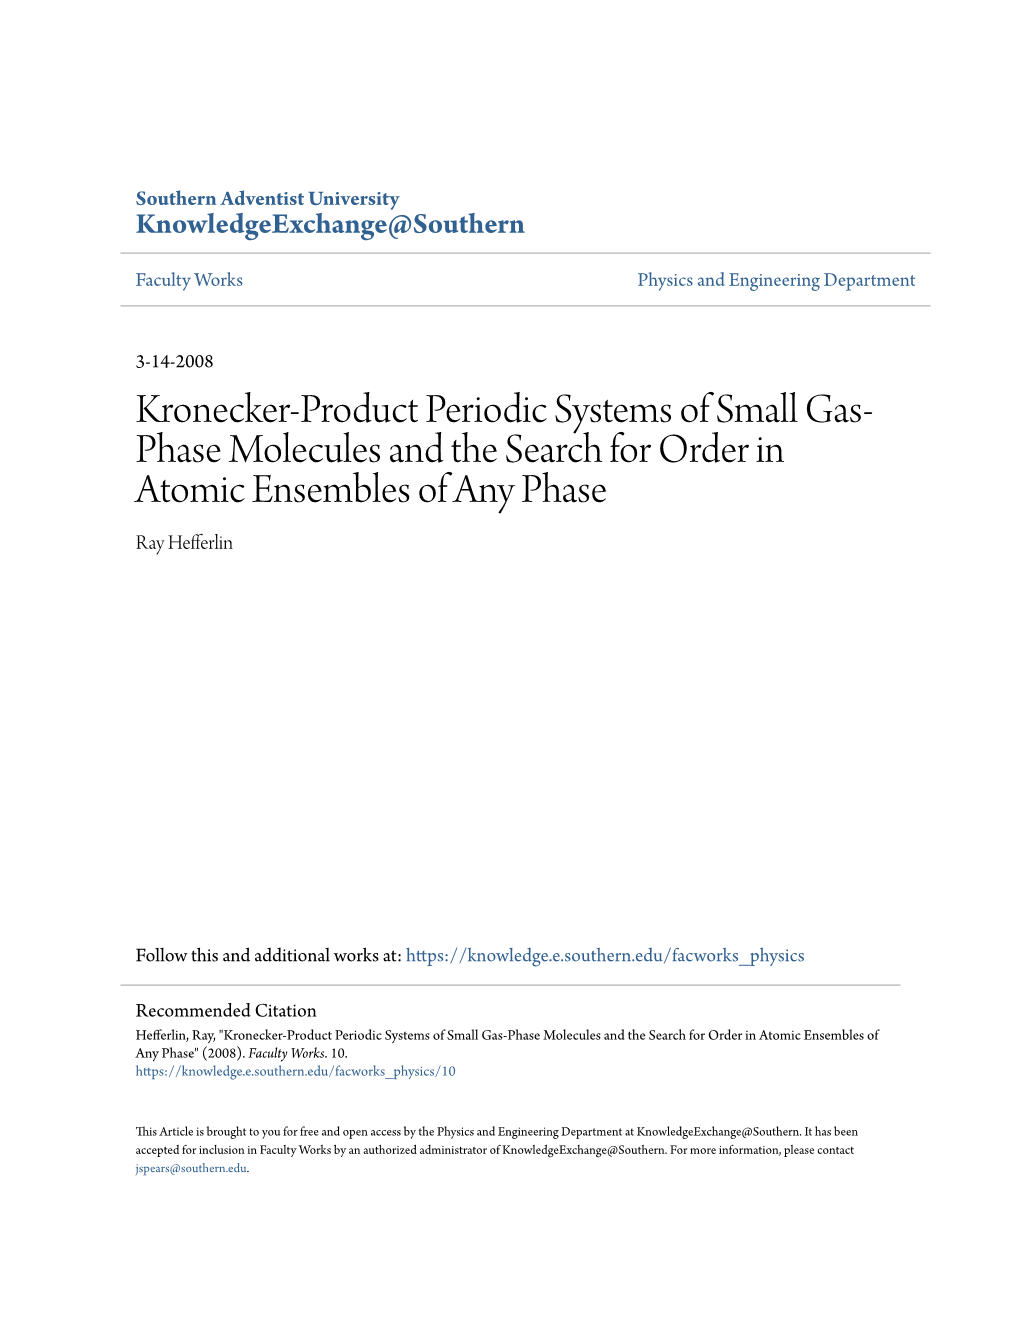 Kronecker-Product Periodic Systems of Small Gas-Phase Molecules and the Search for Order in Atomic Ensembles of Any Phase" (2008)